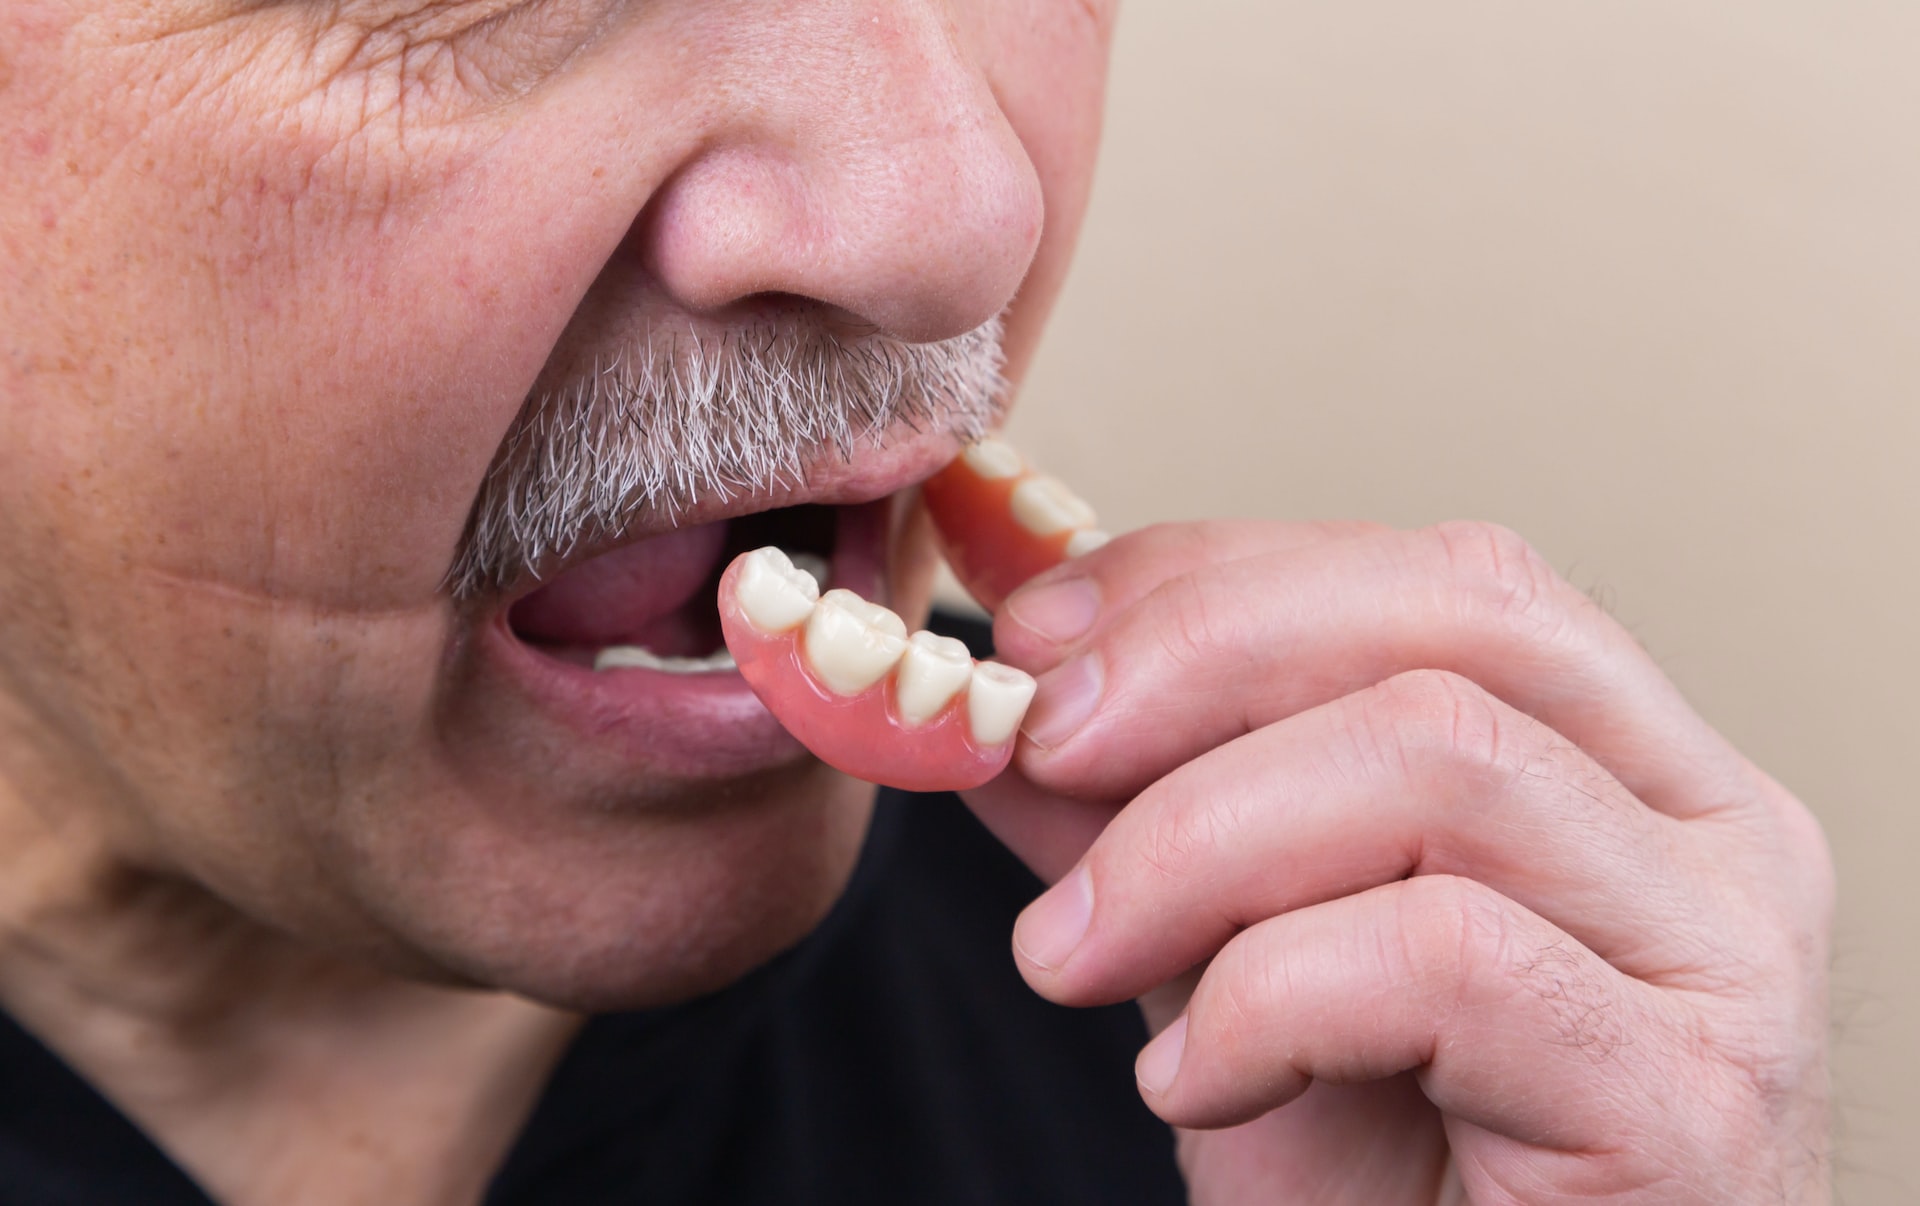 Man pops a set of partial dentures into his mouth after visiting a dentist in Las Vegas, NV